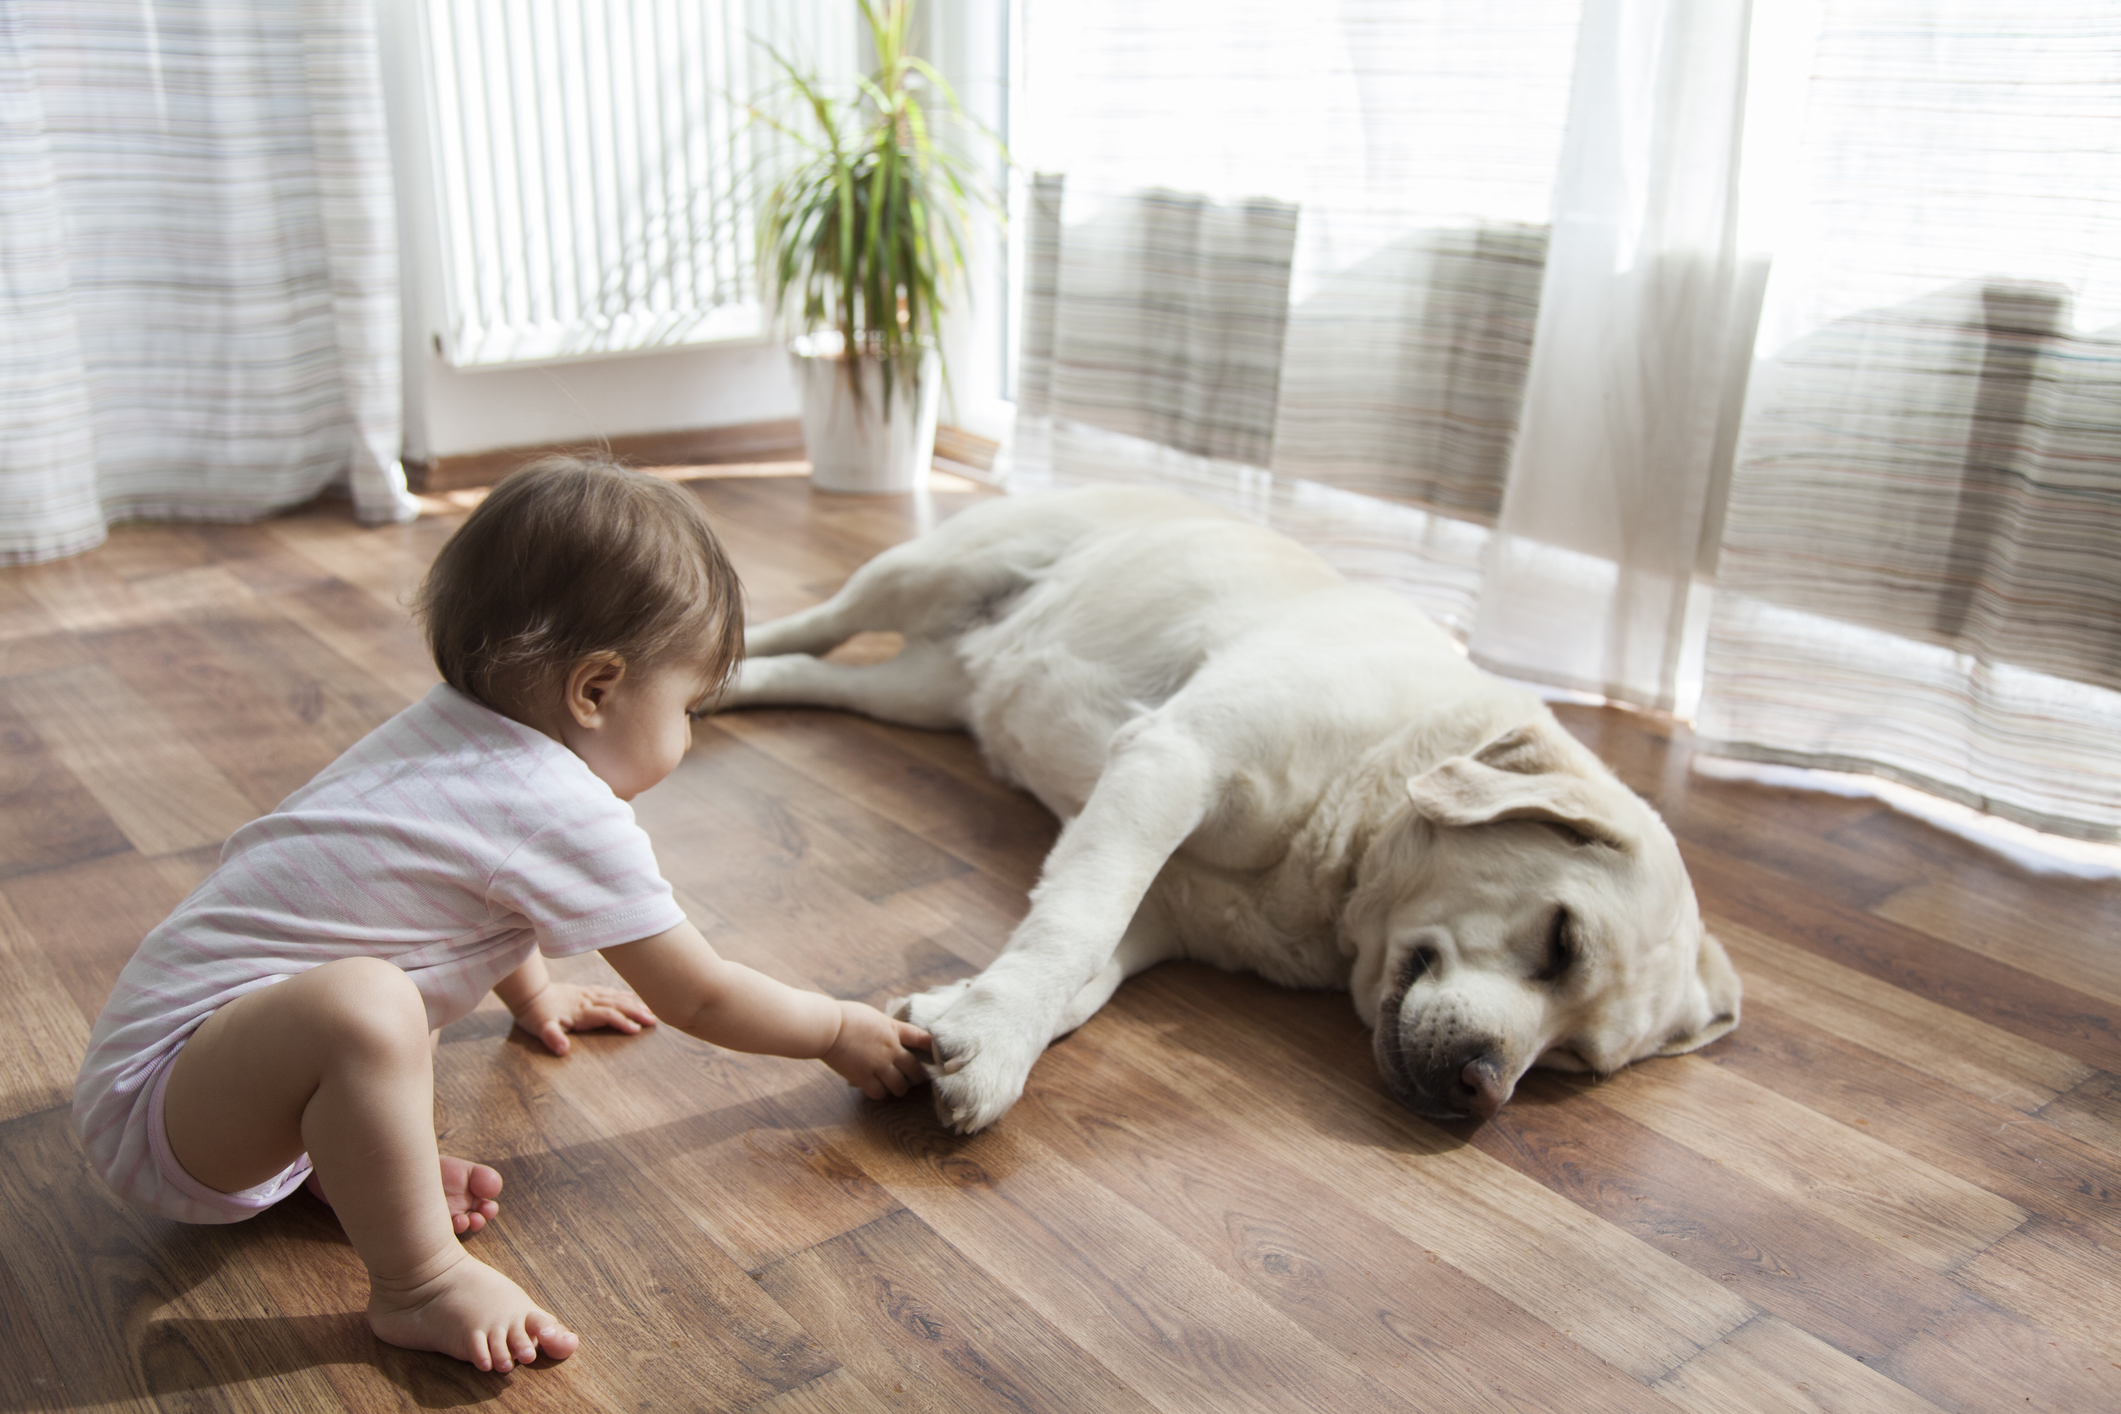 Toddler curiously plays with an old Labrador in a brightly lit family room